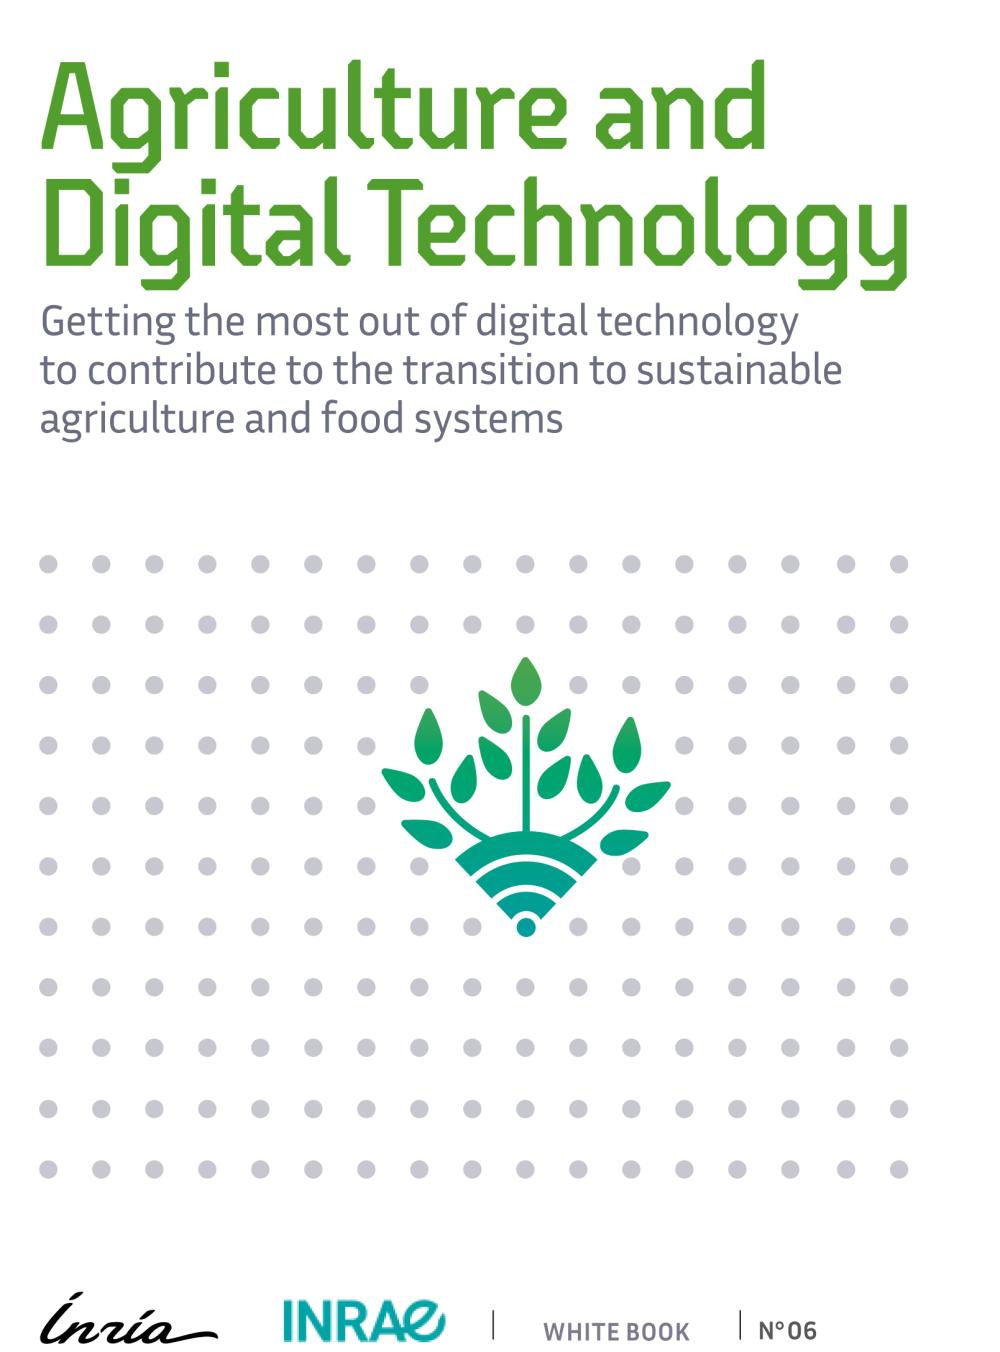 Agriculture and Digital Technology: a white paper by Inria and INRAE to establish the foundations for responsible digital agriculture